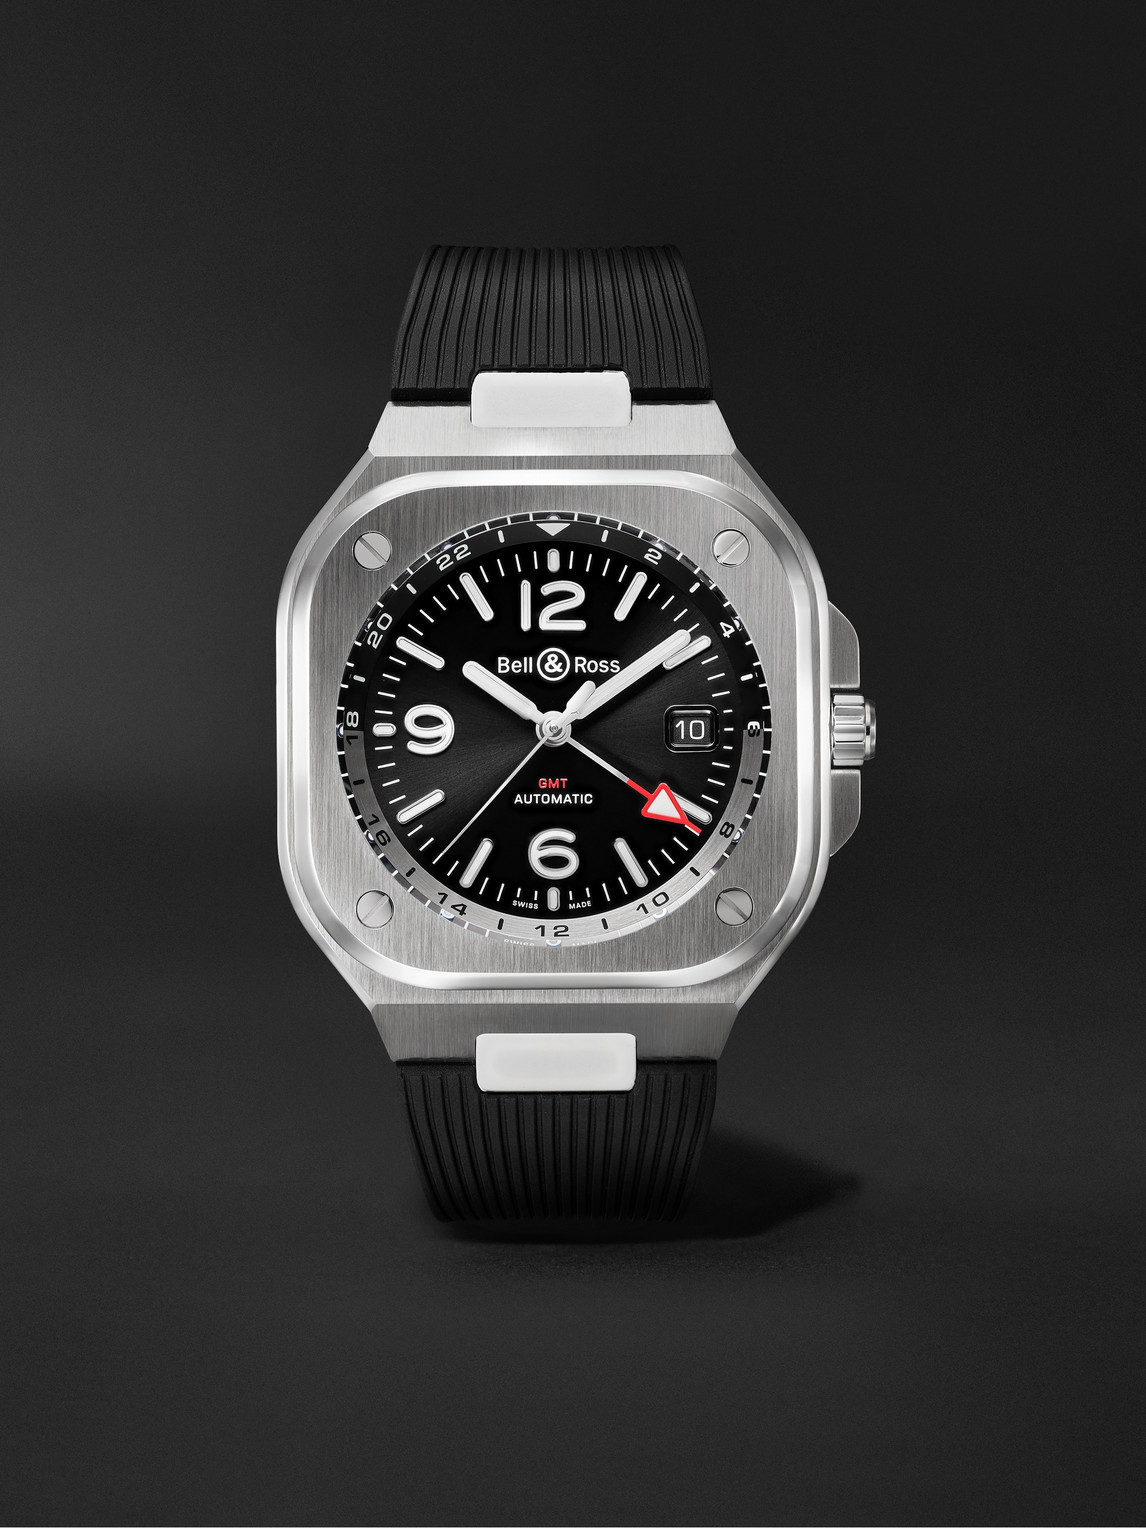 Bell & Ross Br 05 Automatic Gmt 41mm Stainless Steel And Rubber Watch, Ref. No. Br05g-bl-st/srb In Black